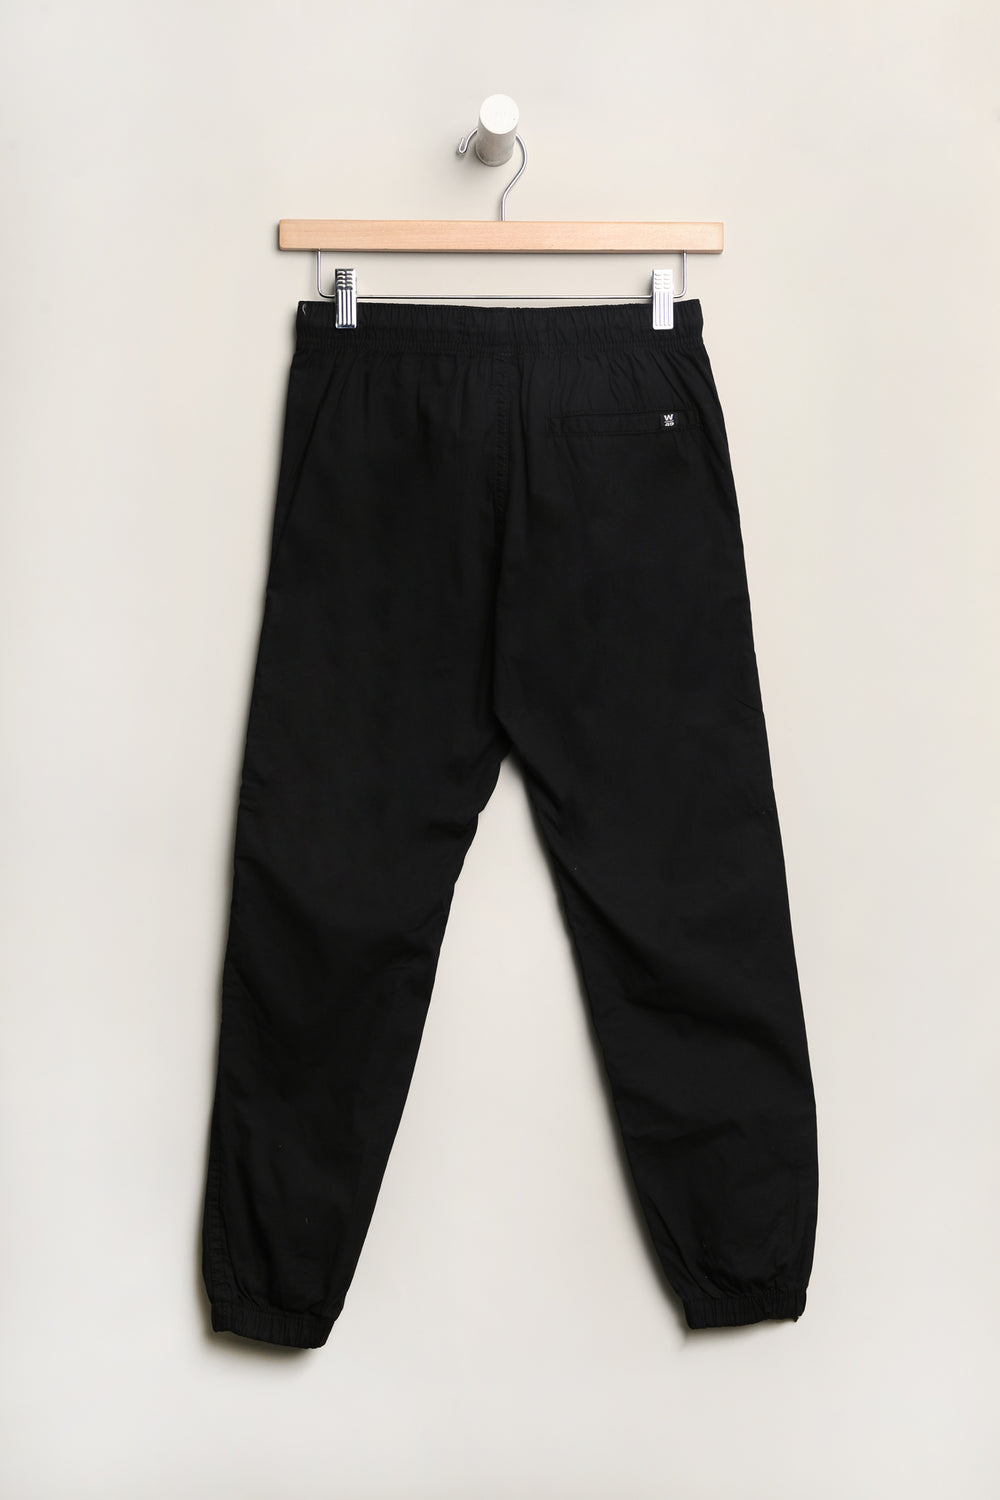 West49 Youth Relaxed Poplin Jogger West49 Youth Relaxed Poplin Jogger